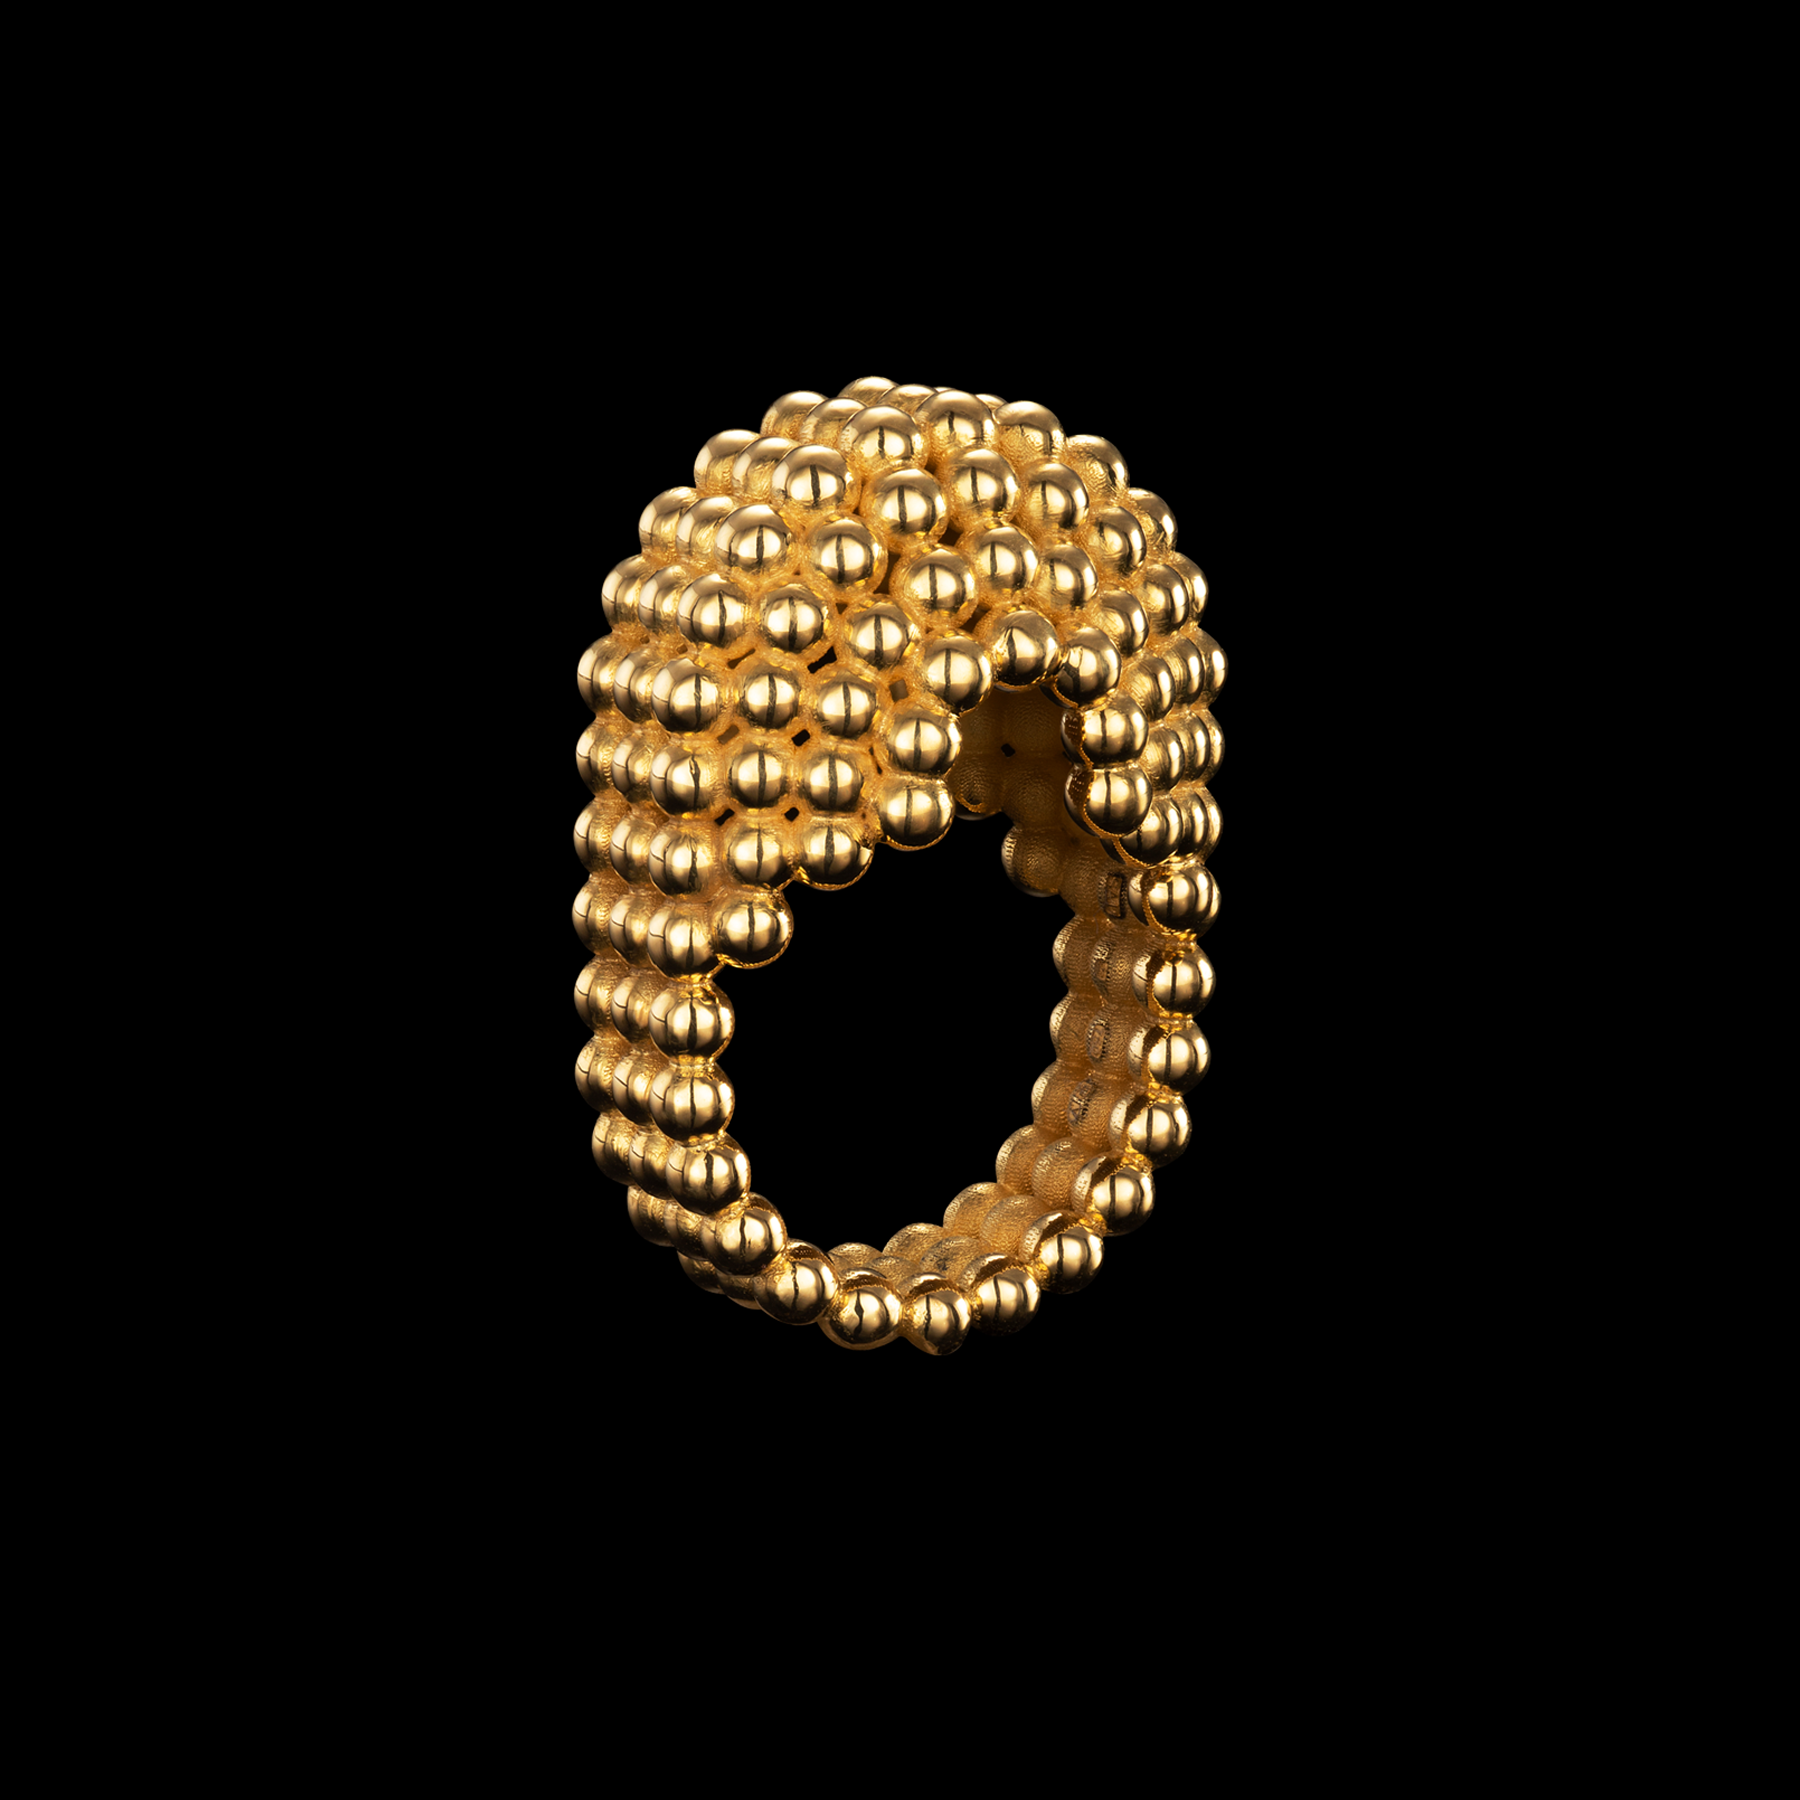 Goldenway ring by designer Solange Azagury-Partridge - 18 carat Yellow Gold - front view vertical.